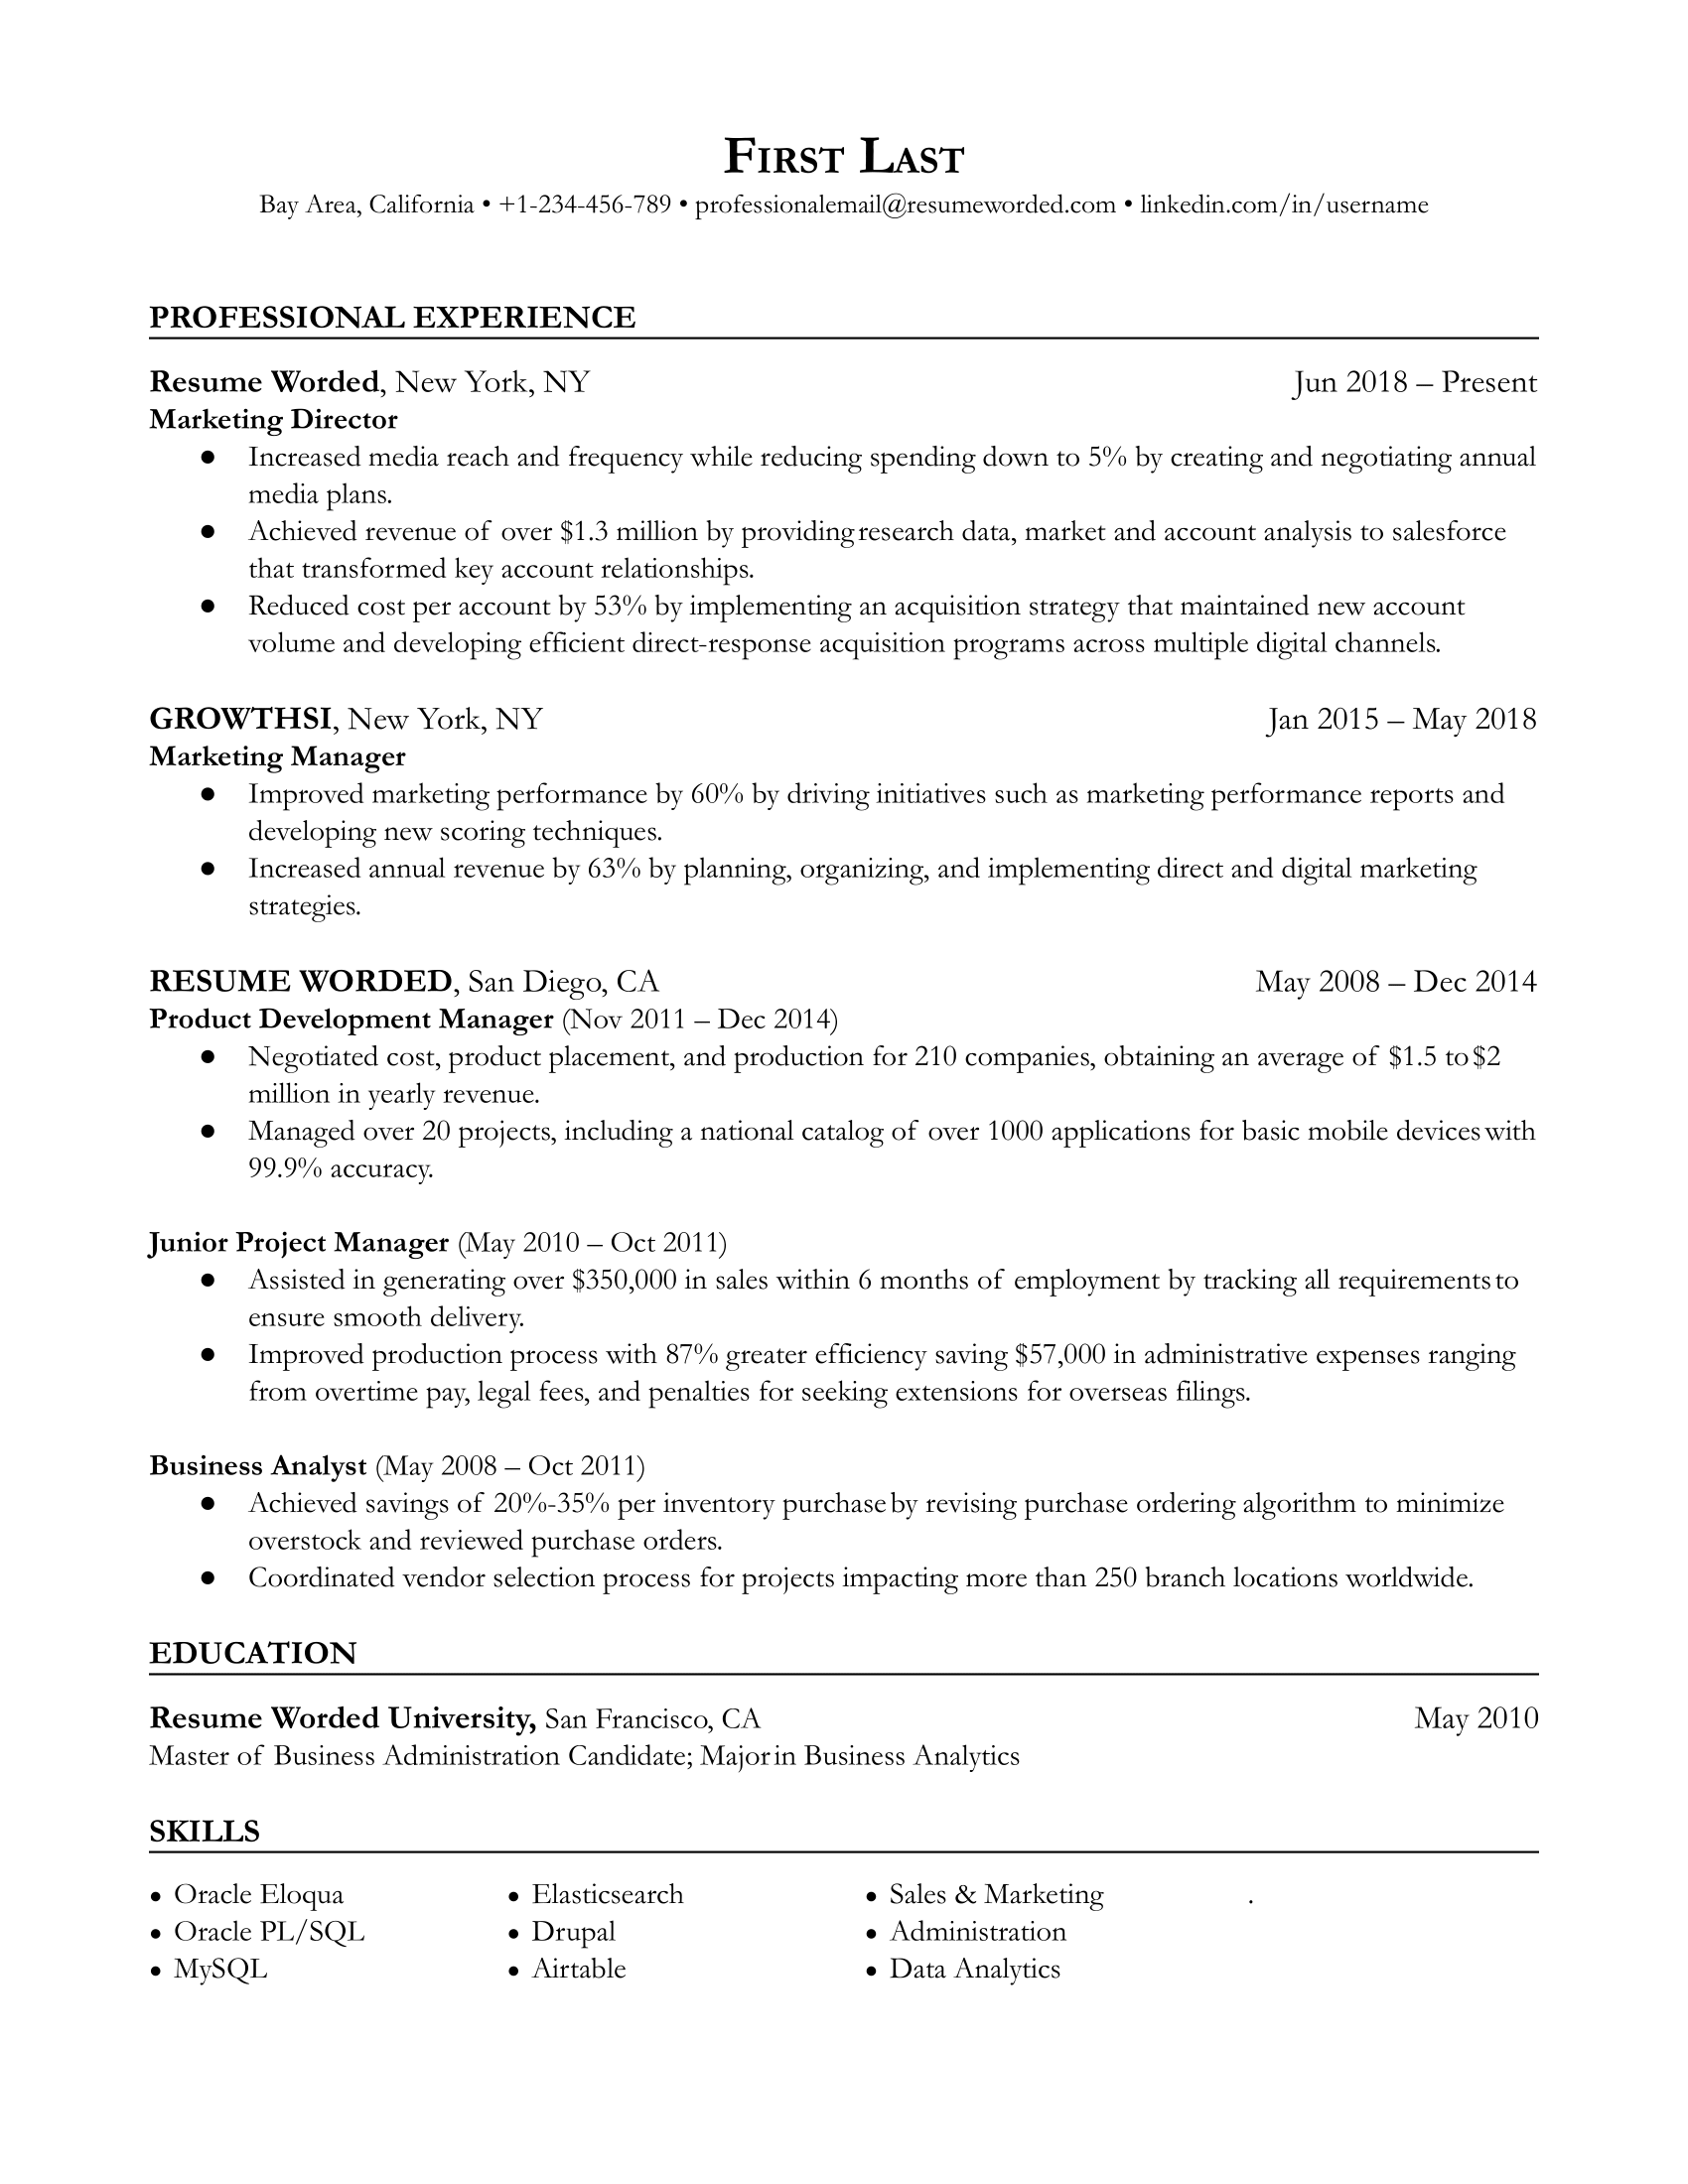 Concise resume template you can download in Google Docs format